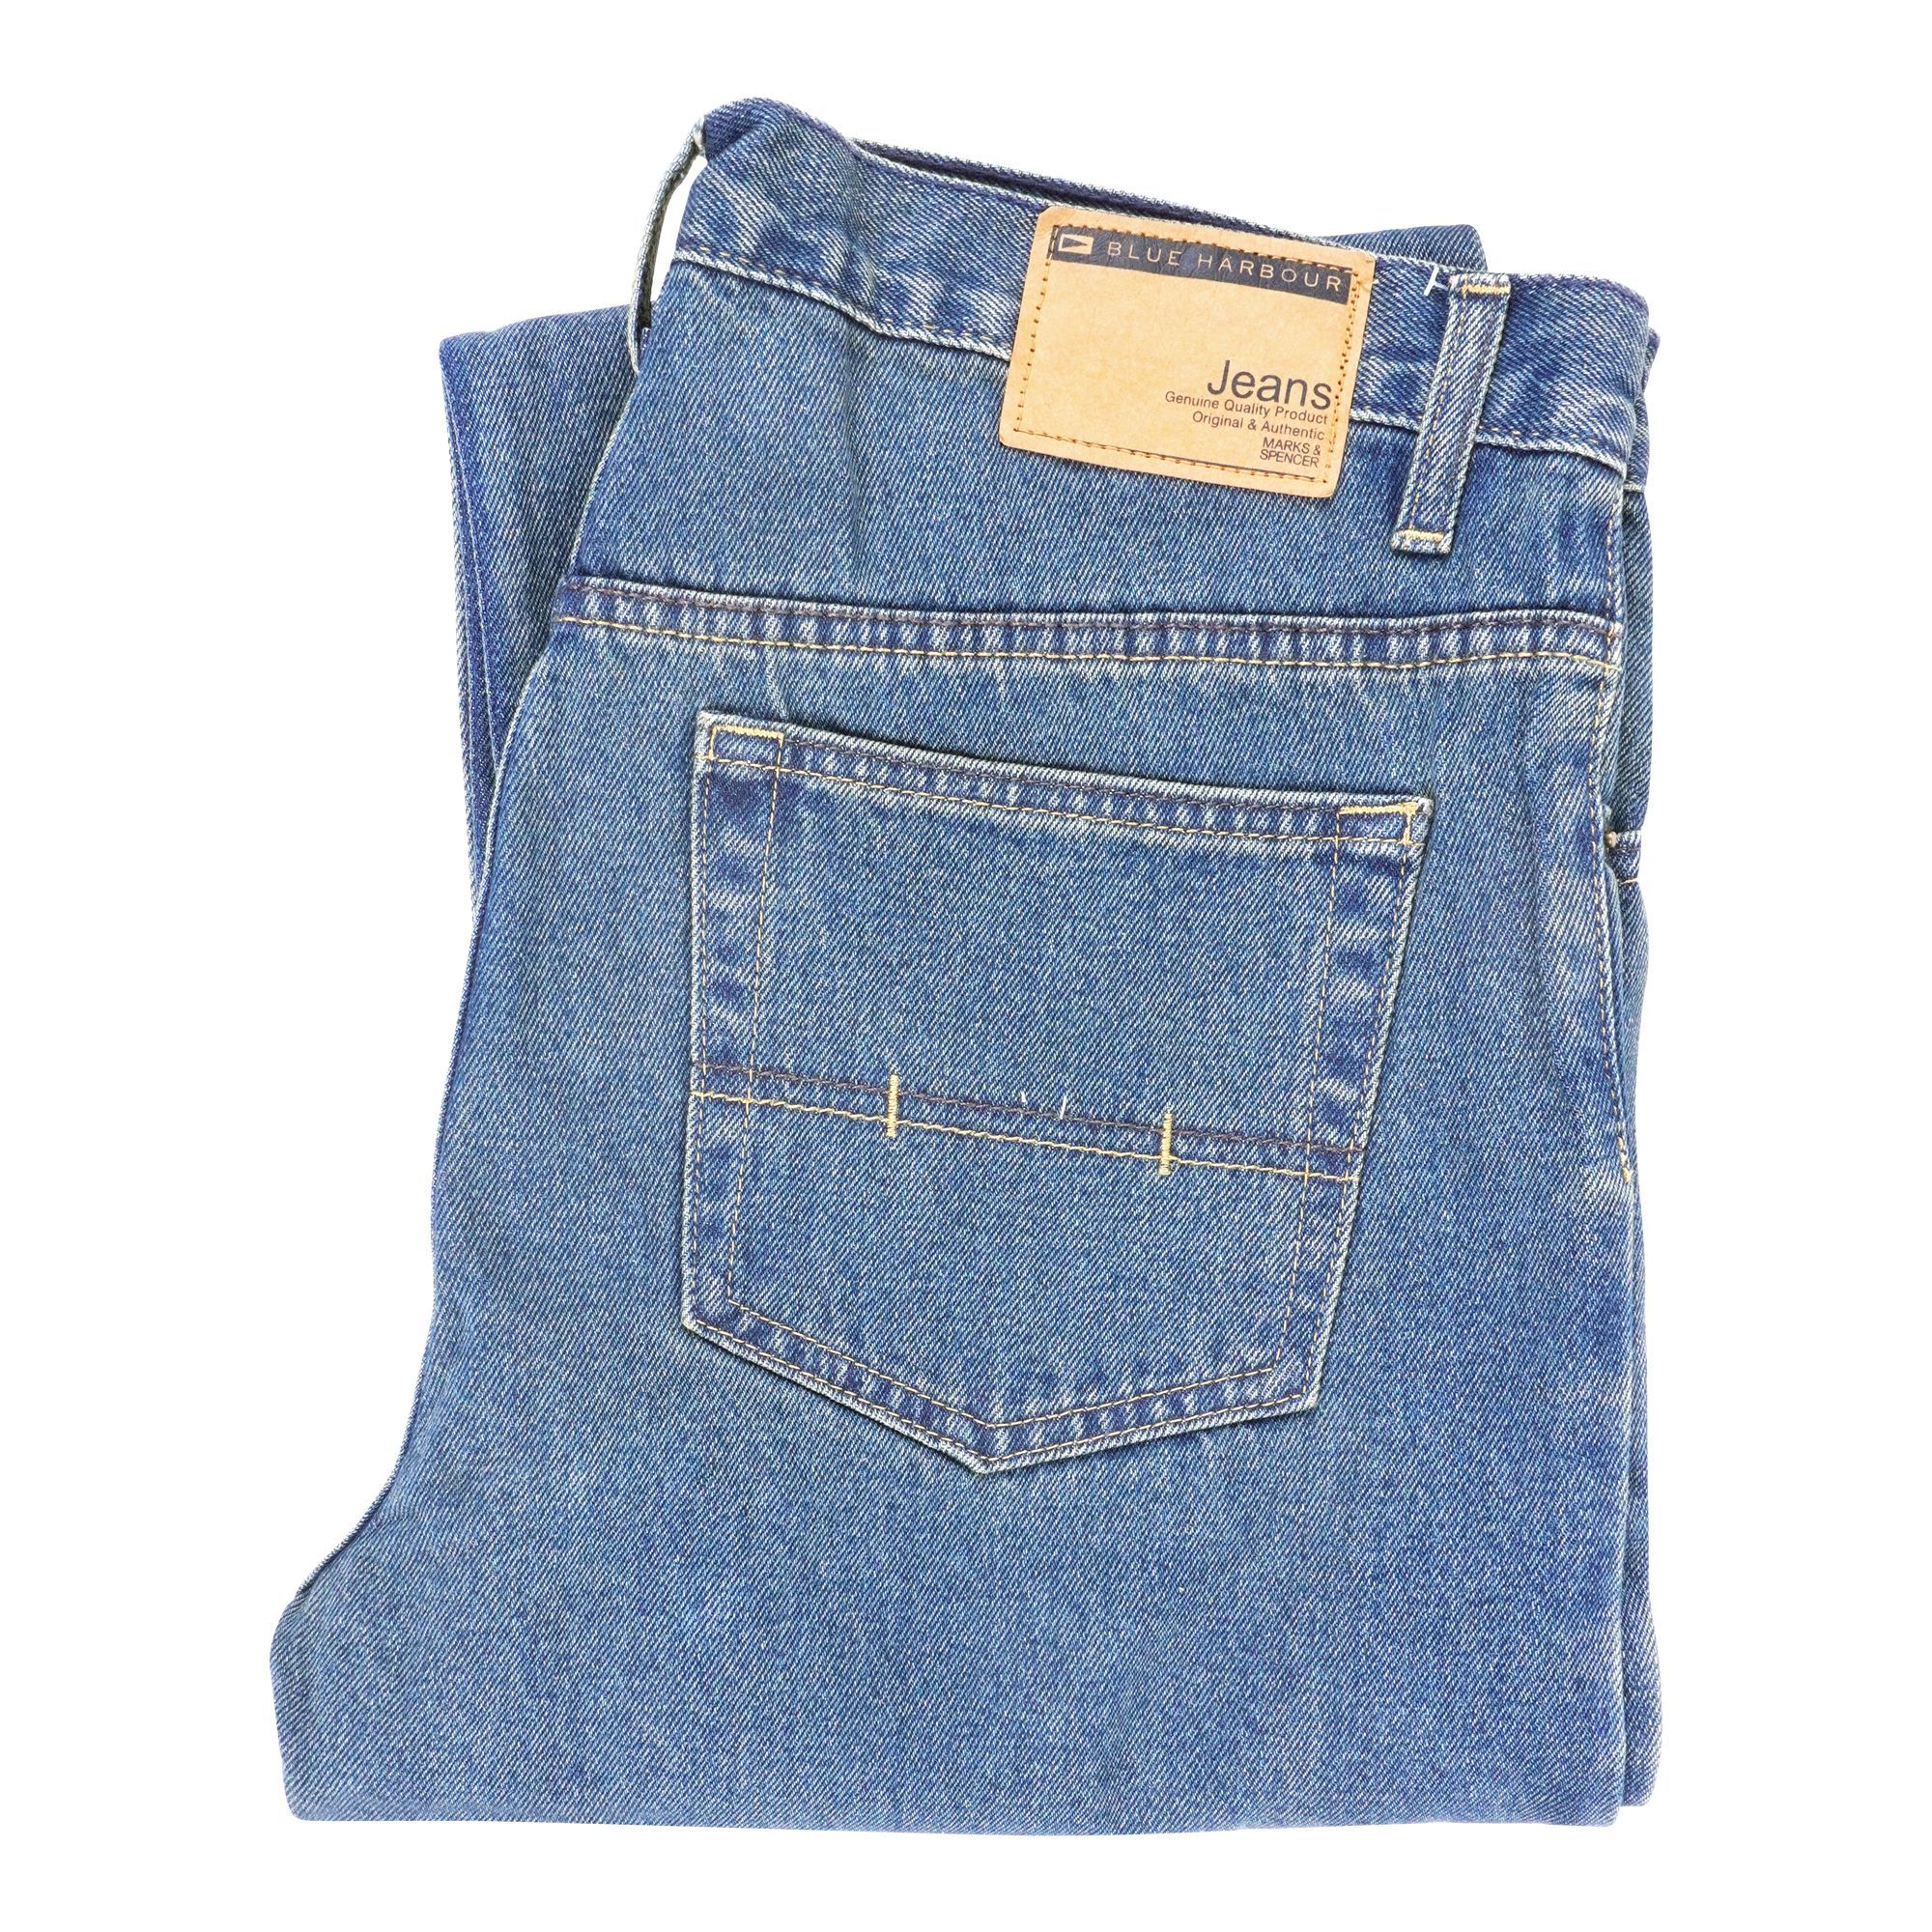 Buy M&S Jeans Blue Harbour Tint ,Light Blue Online at Best Price in ...